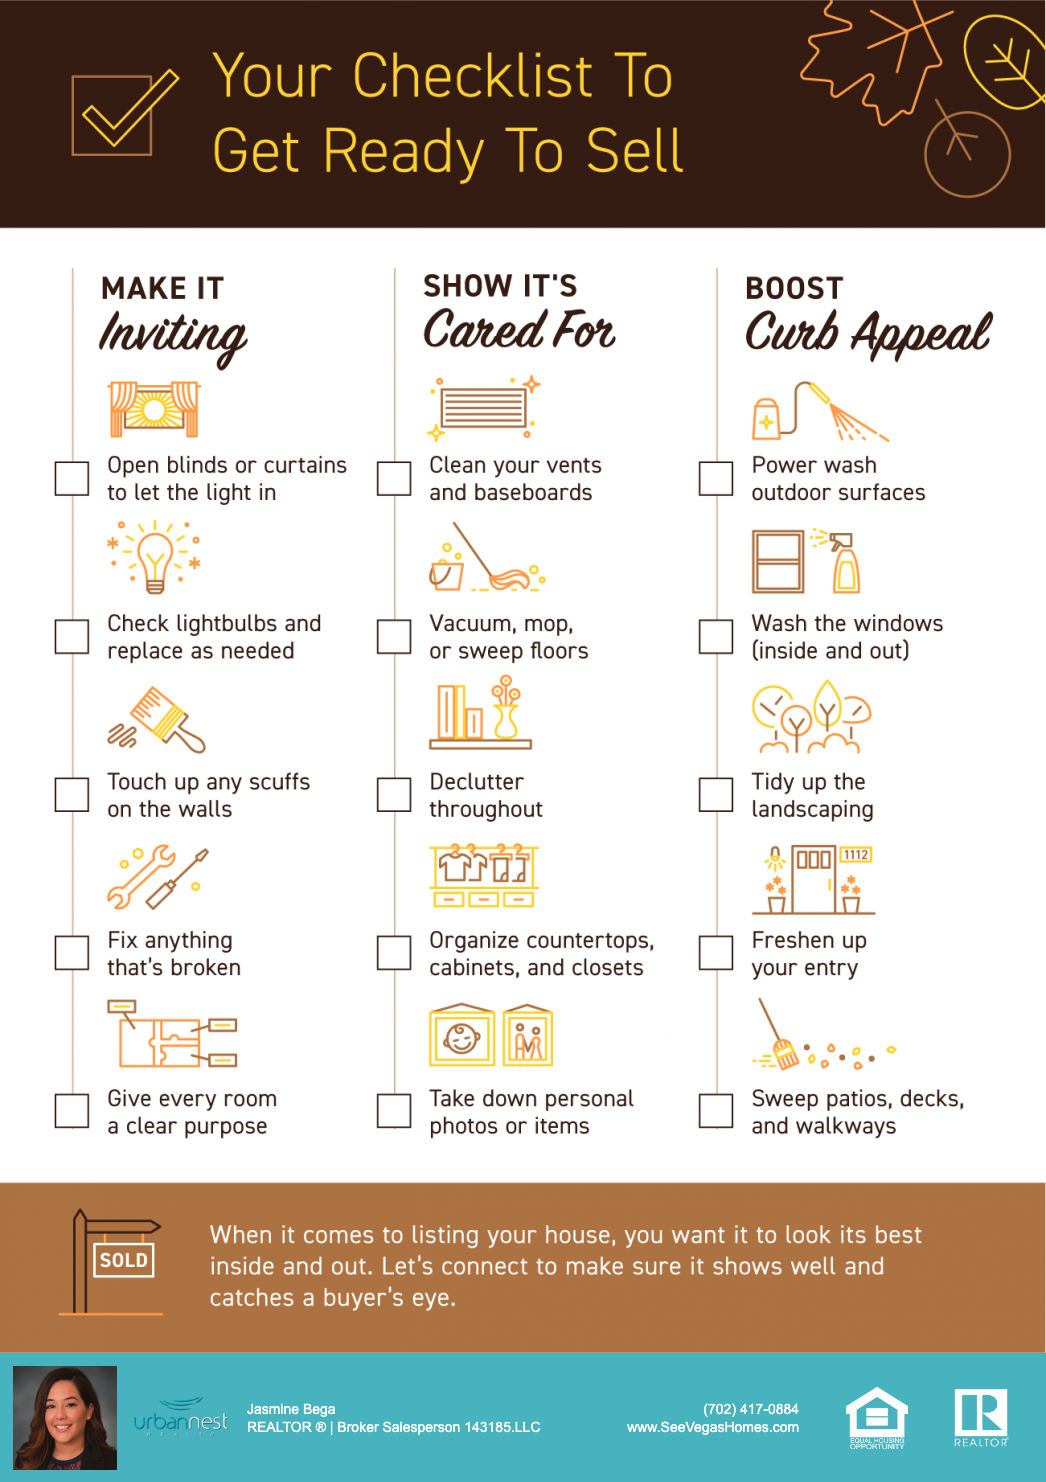 Your Checklist To Get Ready To Sell [INFOGRAPHIC]